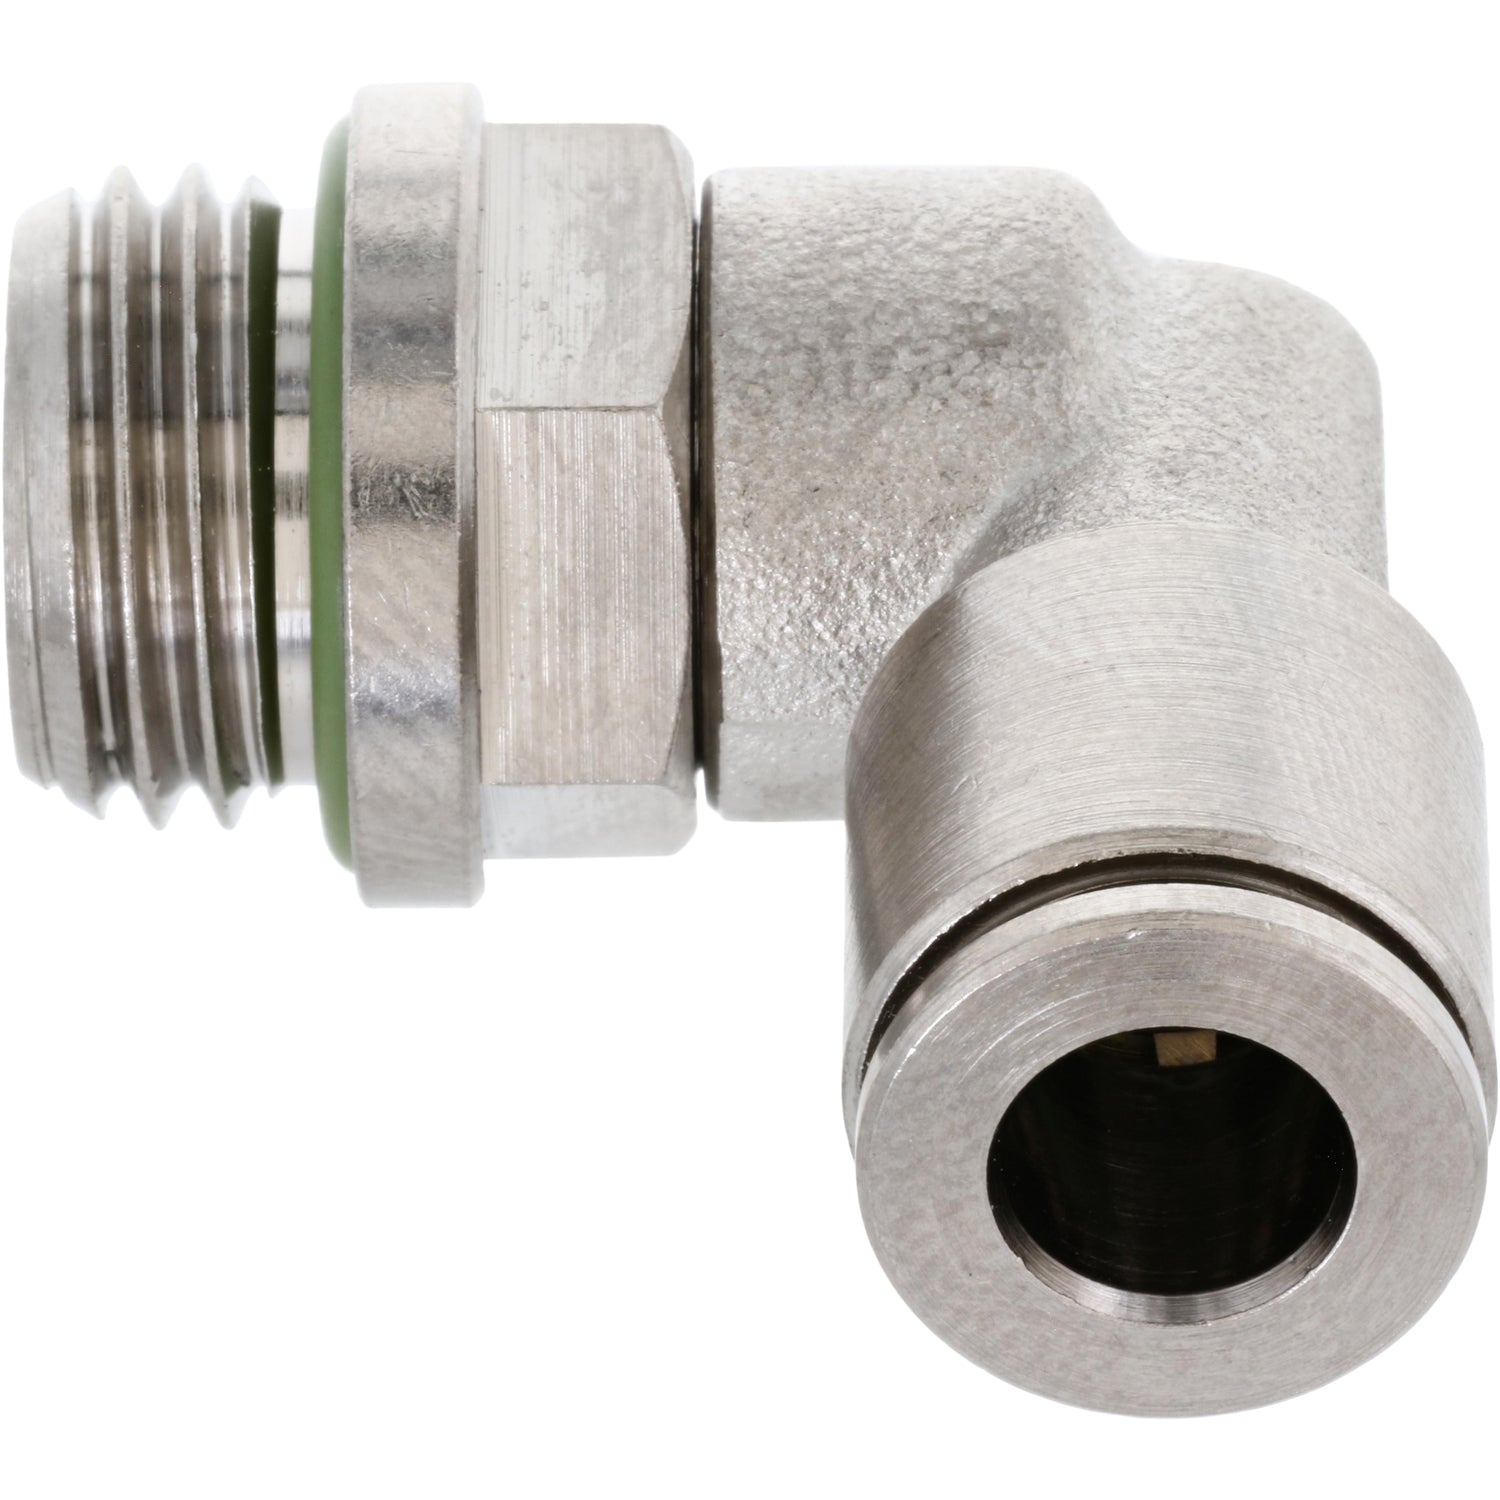 Nickel-platted push-in L-fitting with threaded and push connect ends and green rubber gasket. Part shown on white background. 